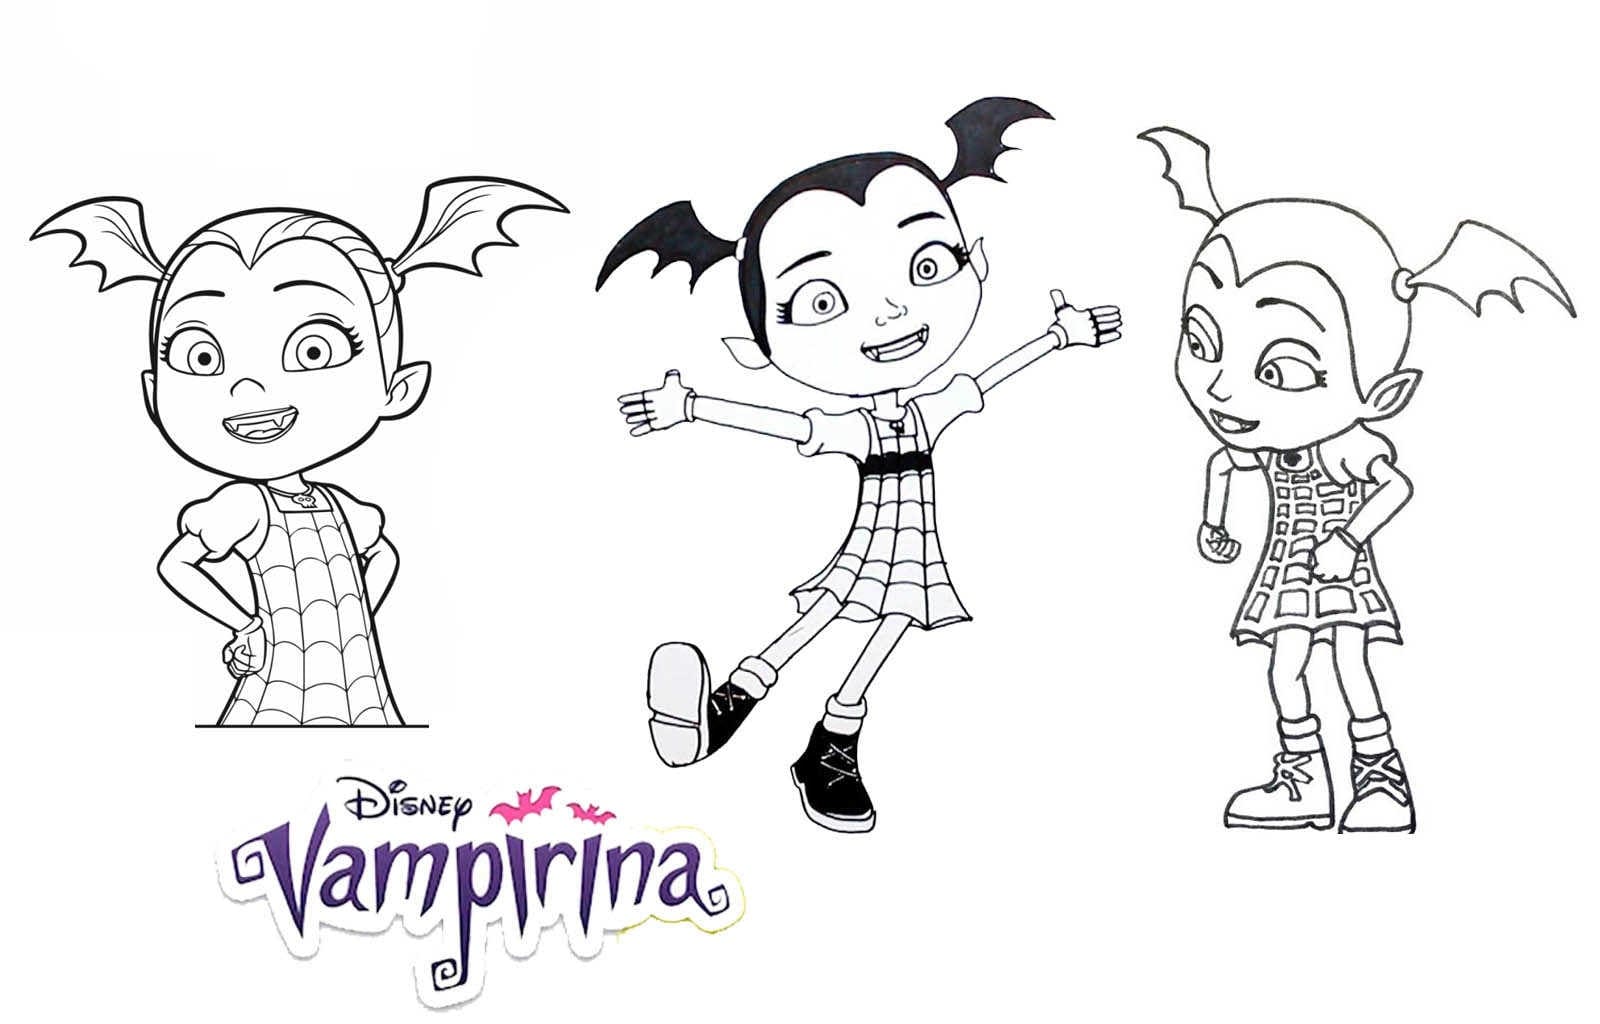 Delightful Vampirina From Different Angles Coloring Page